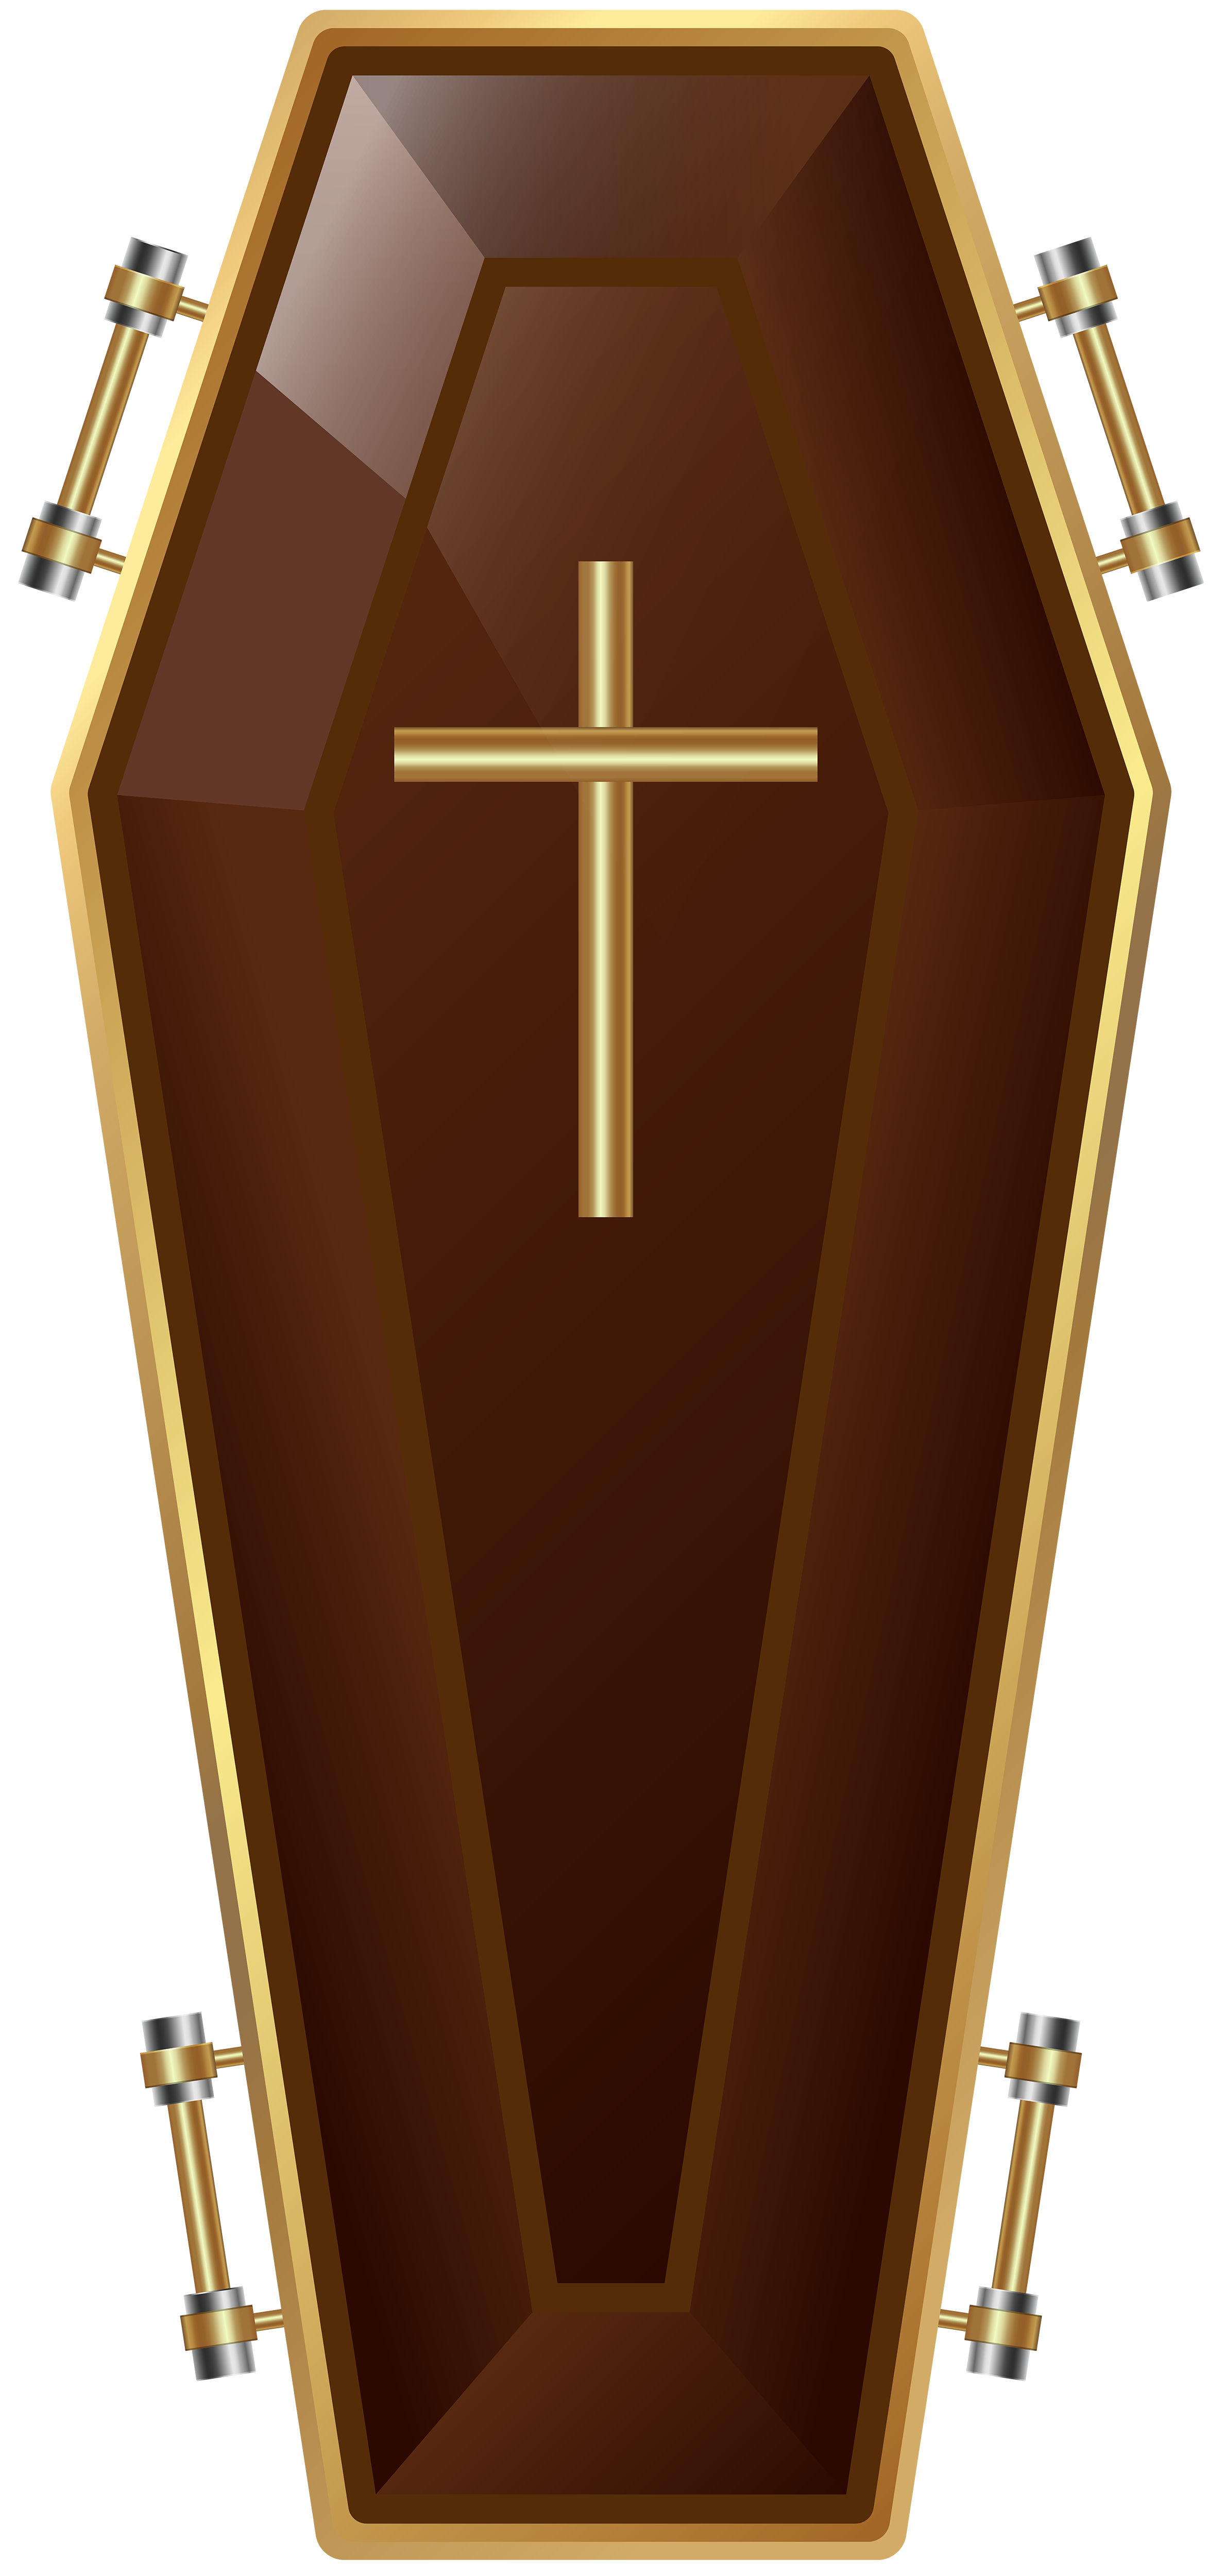 Wooden Coffin PNG Transparent Image